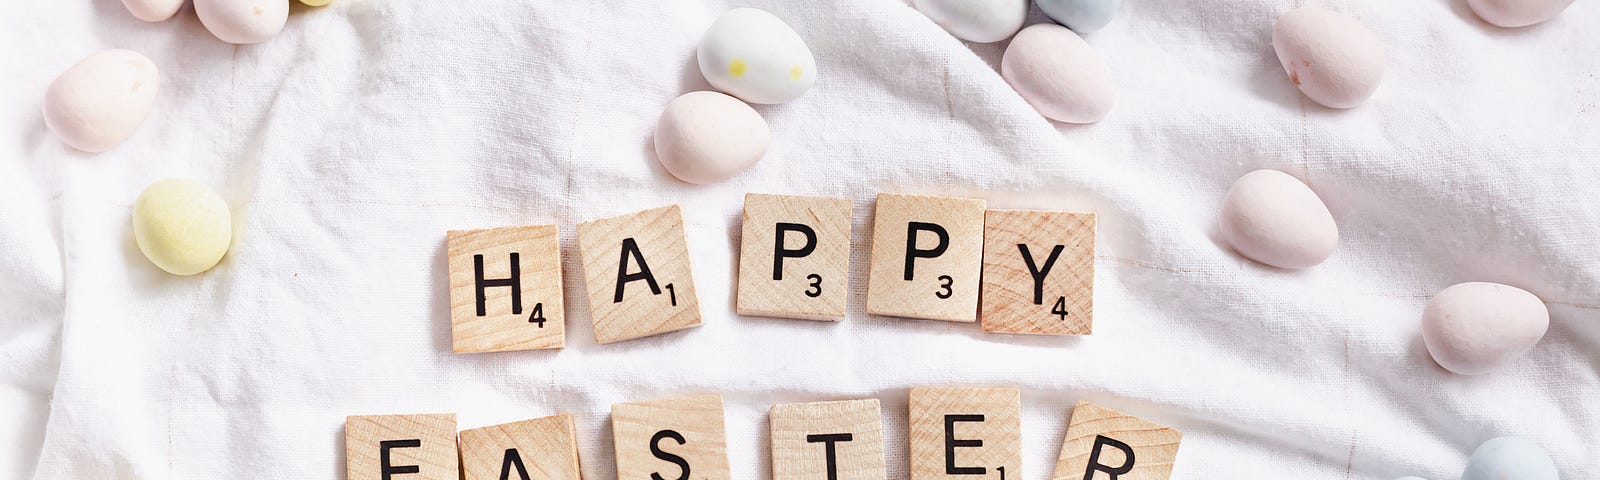 A flat surface with a white cloth on top decorated with pastel colored eggs and the words “Happy Easter” written out with Scrabble wooden tiles.